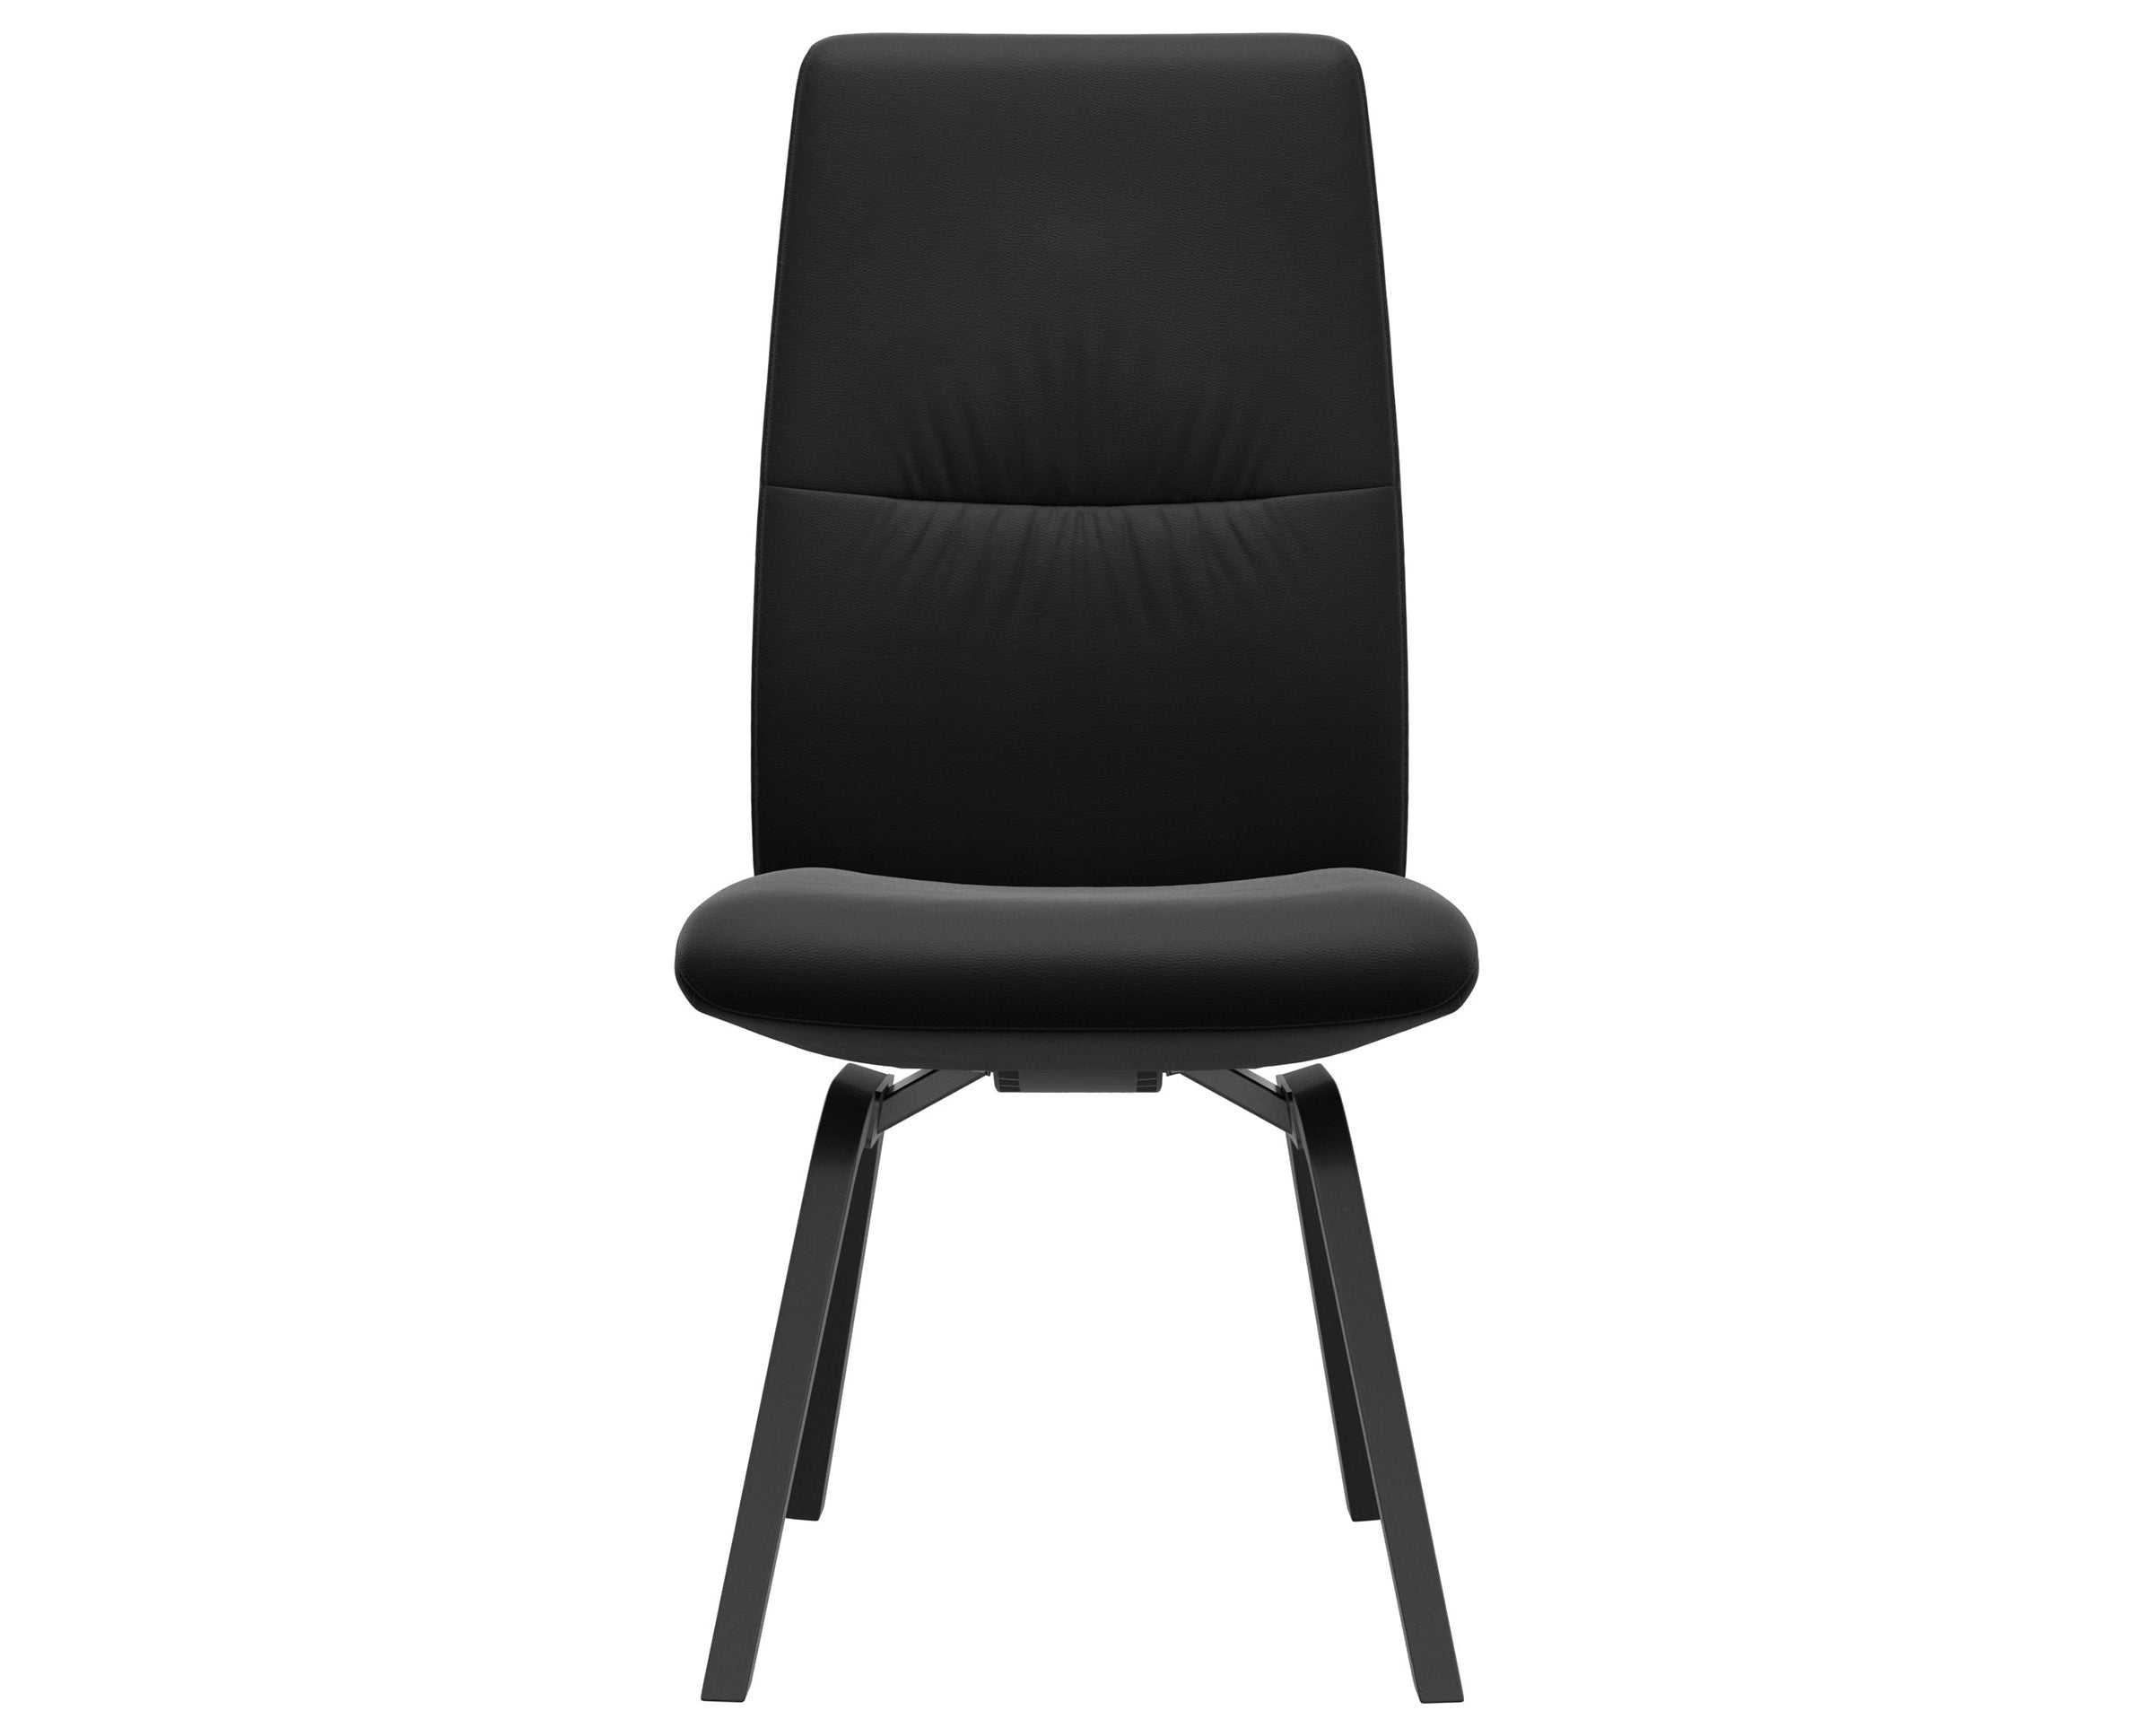 Paloma Leather Black and Black Base | Stressless Mint High Back D200 Dining Chair | Valley Ridge Furniture